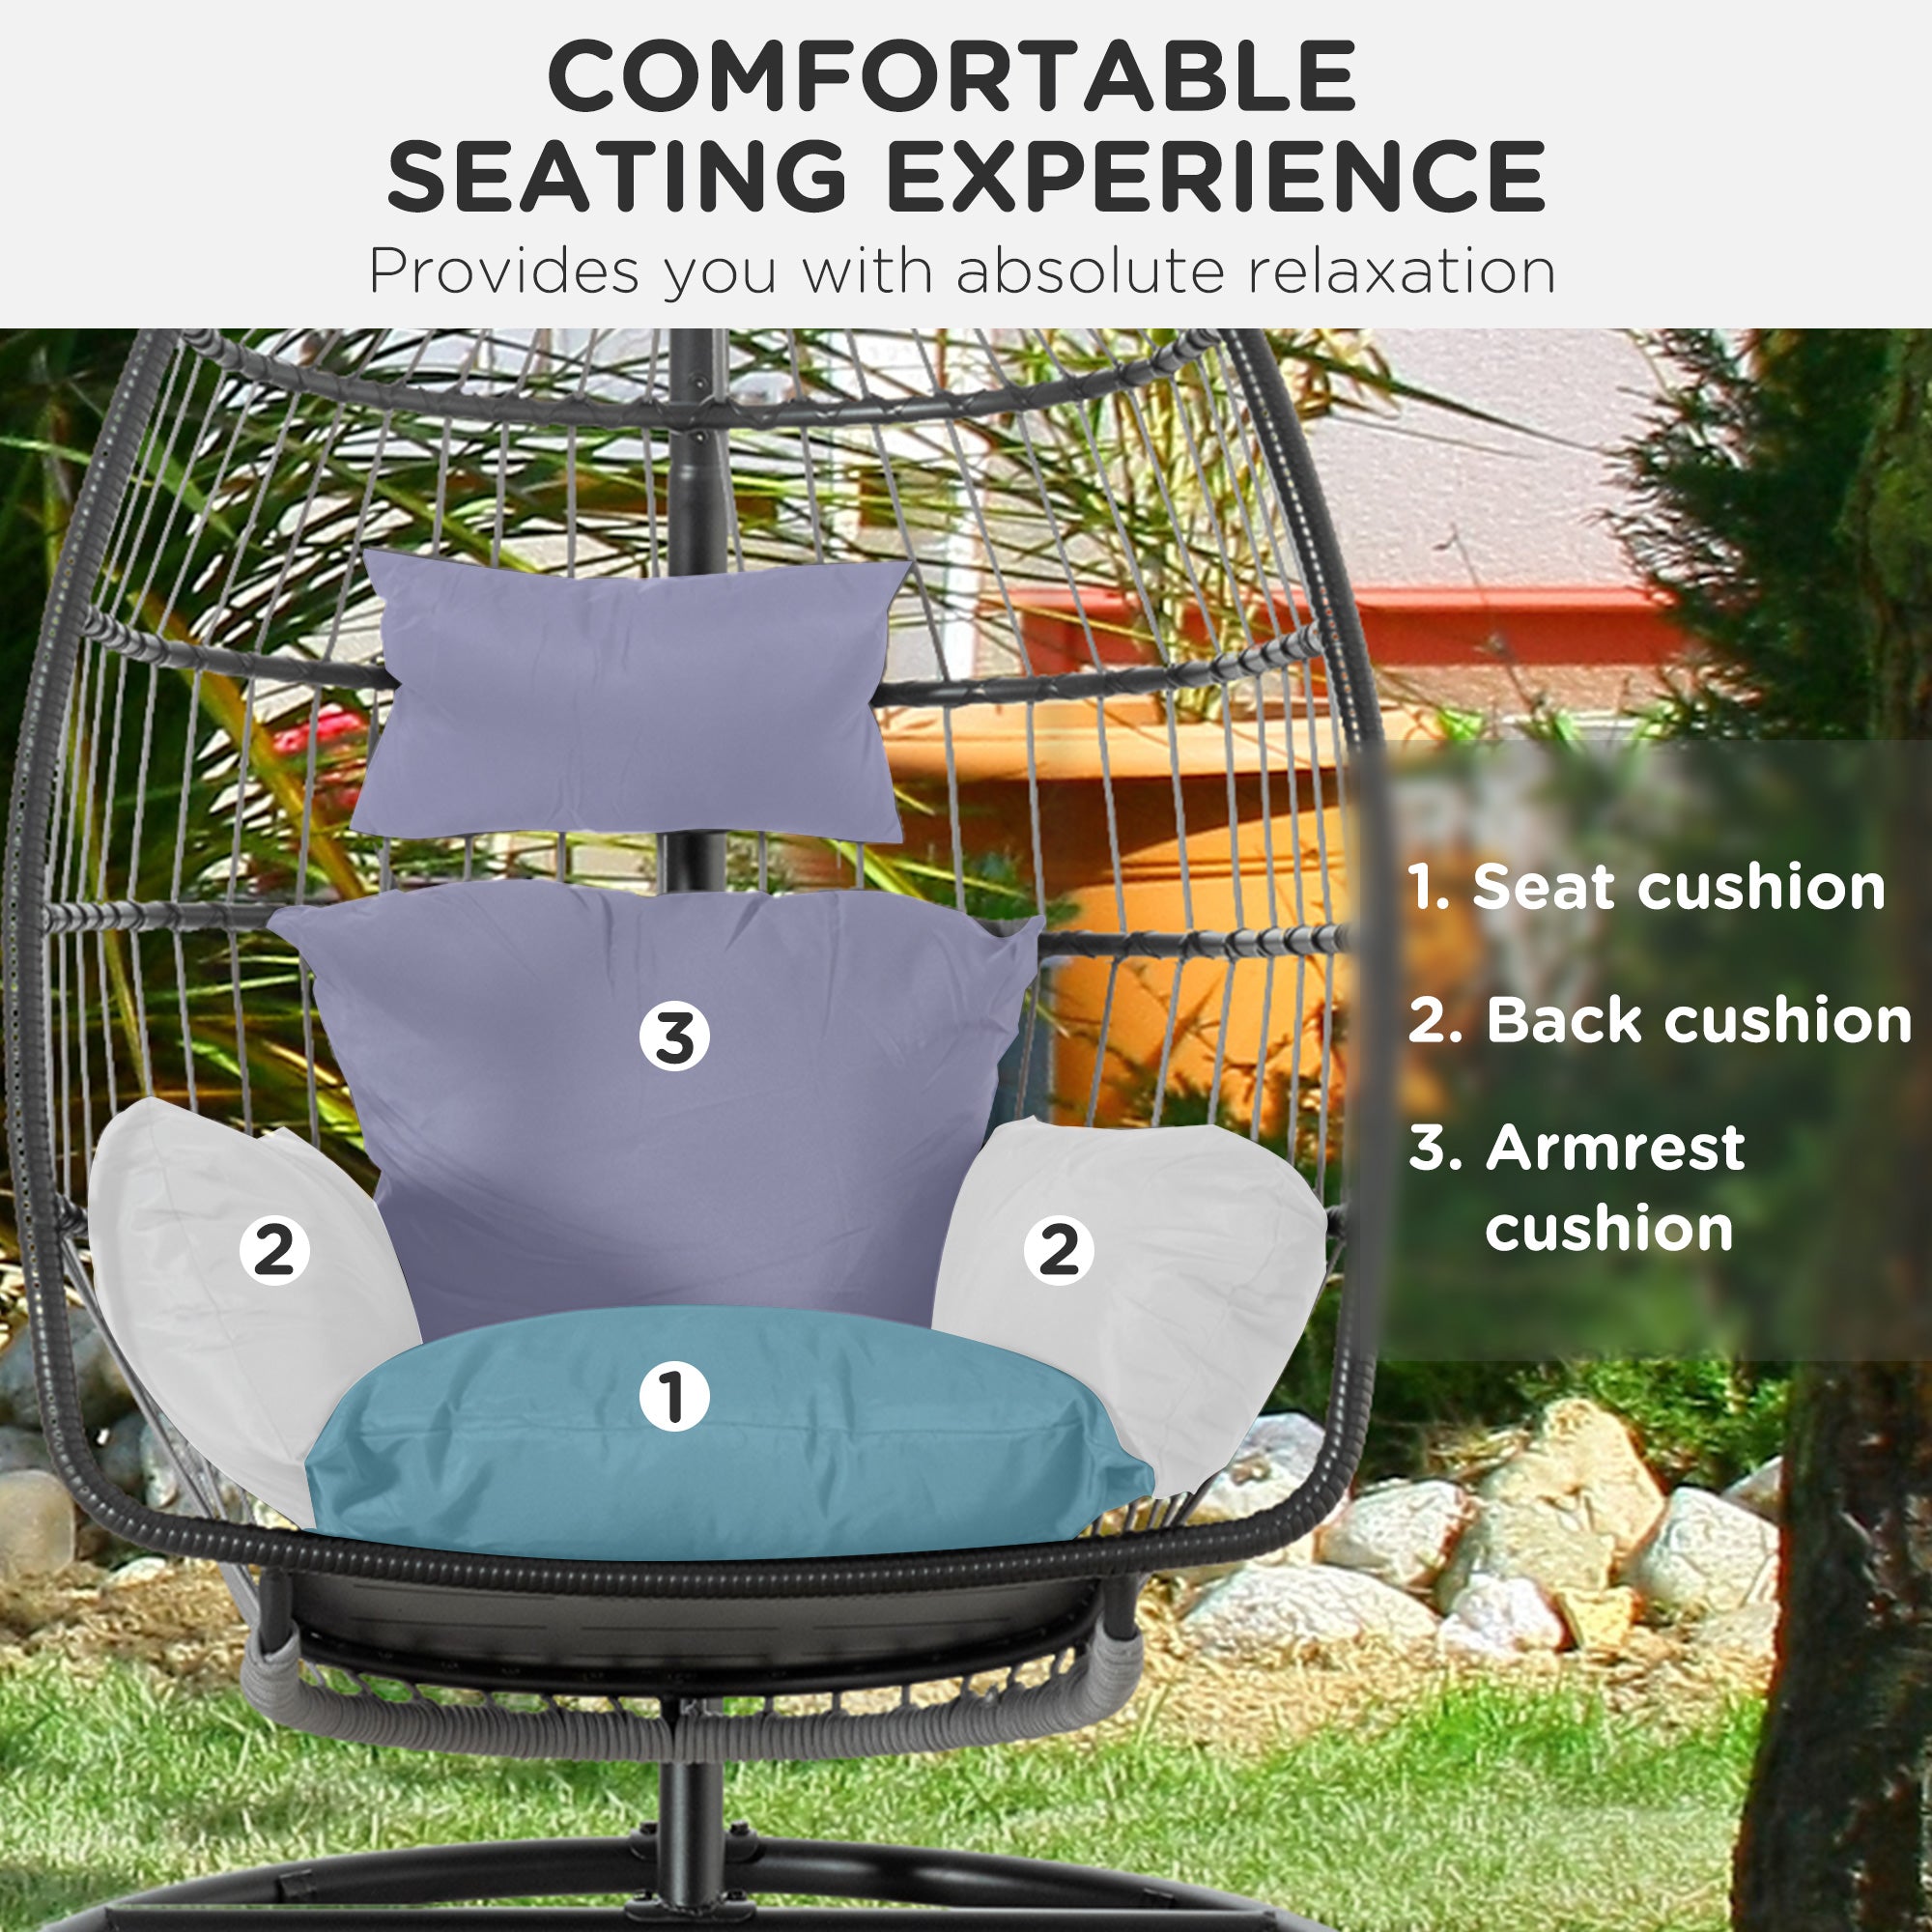 Outsunny Garden Lounge Chair Cushion Set, Patio Egg Chair Seat, Armrest, Back Pad Cushion, Easy Clean & Replacement for Indoor & Outdoor Use Dark Grey - Inspirely